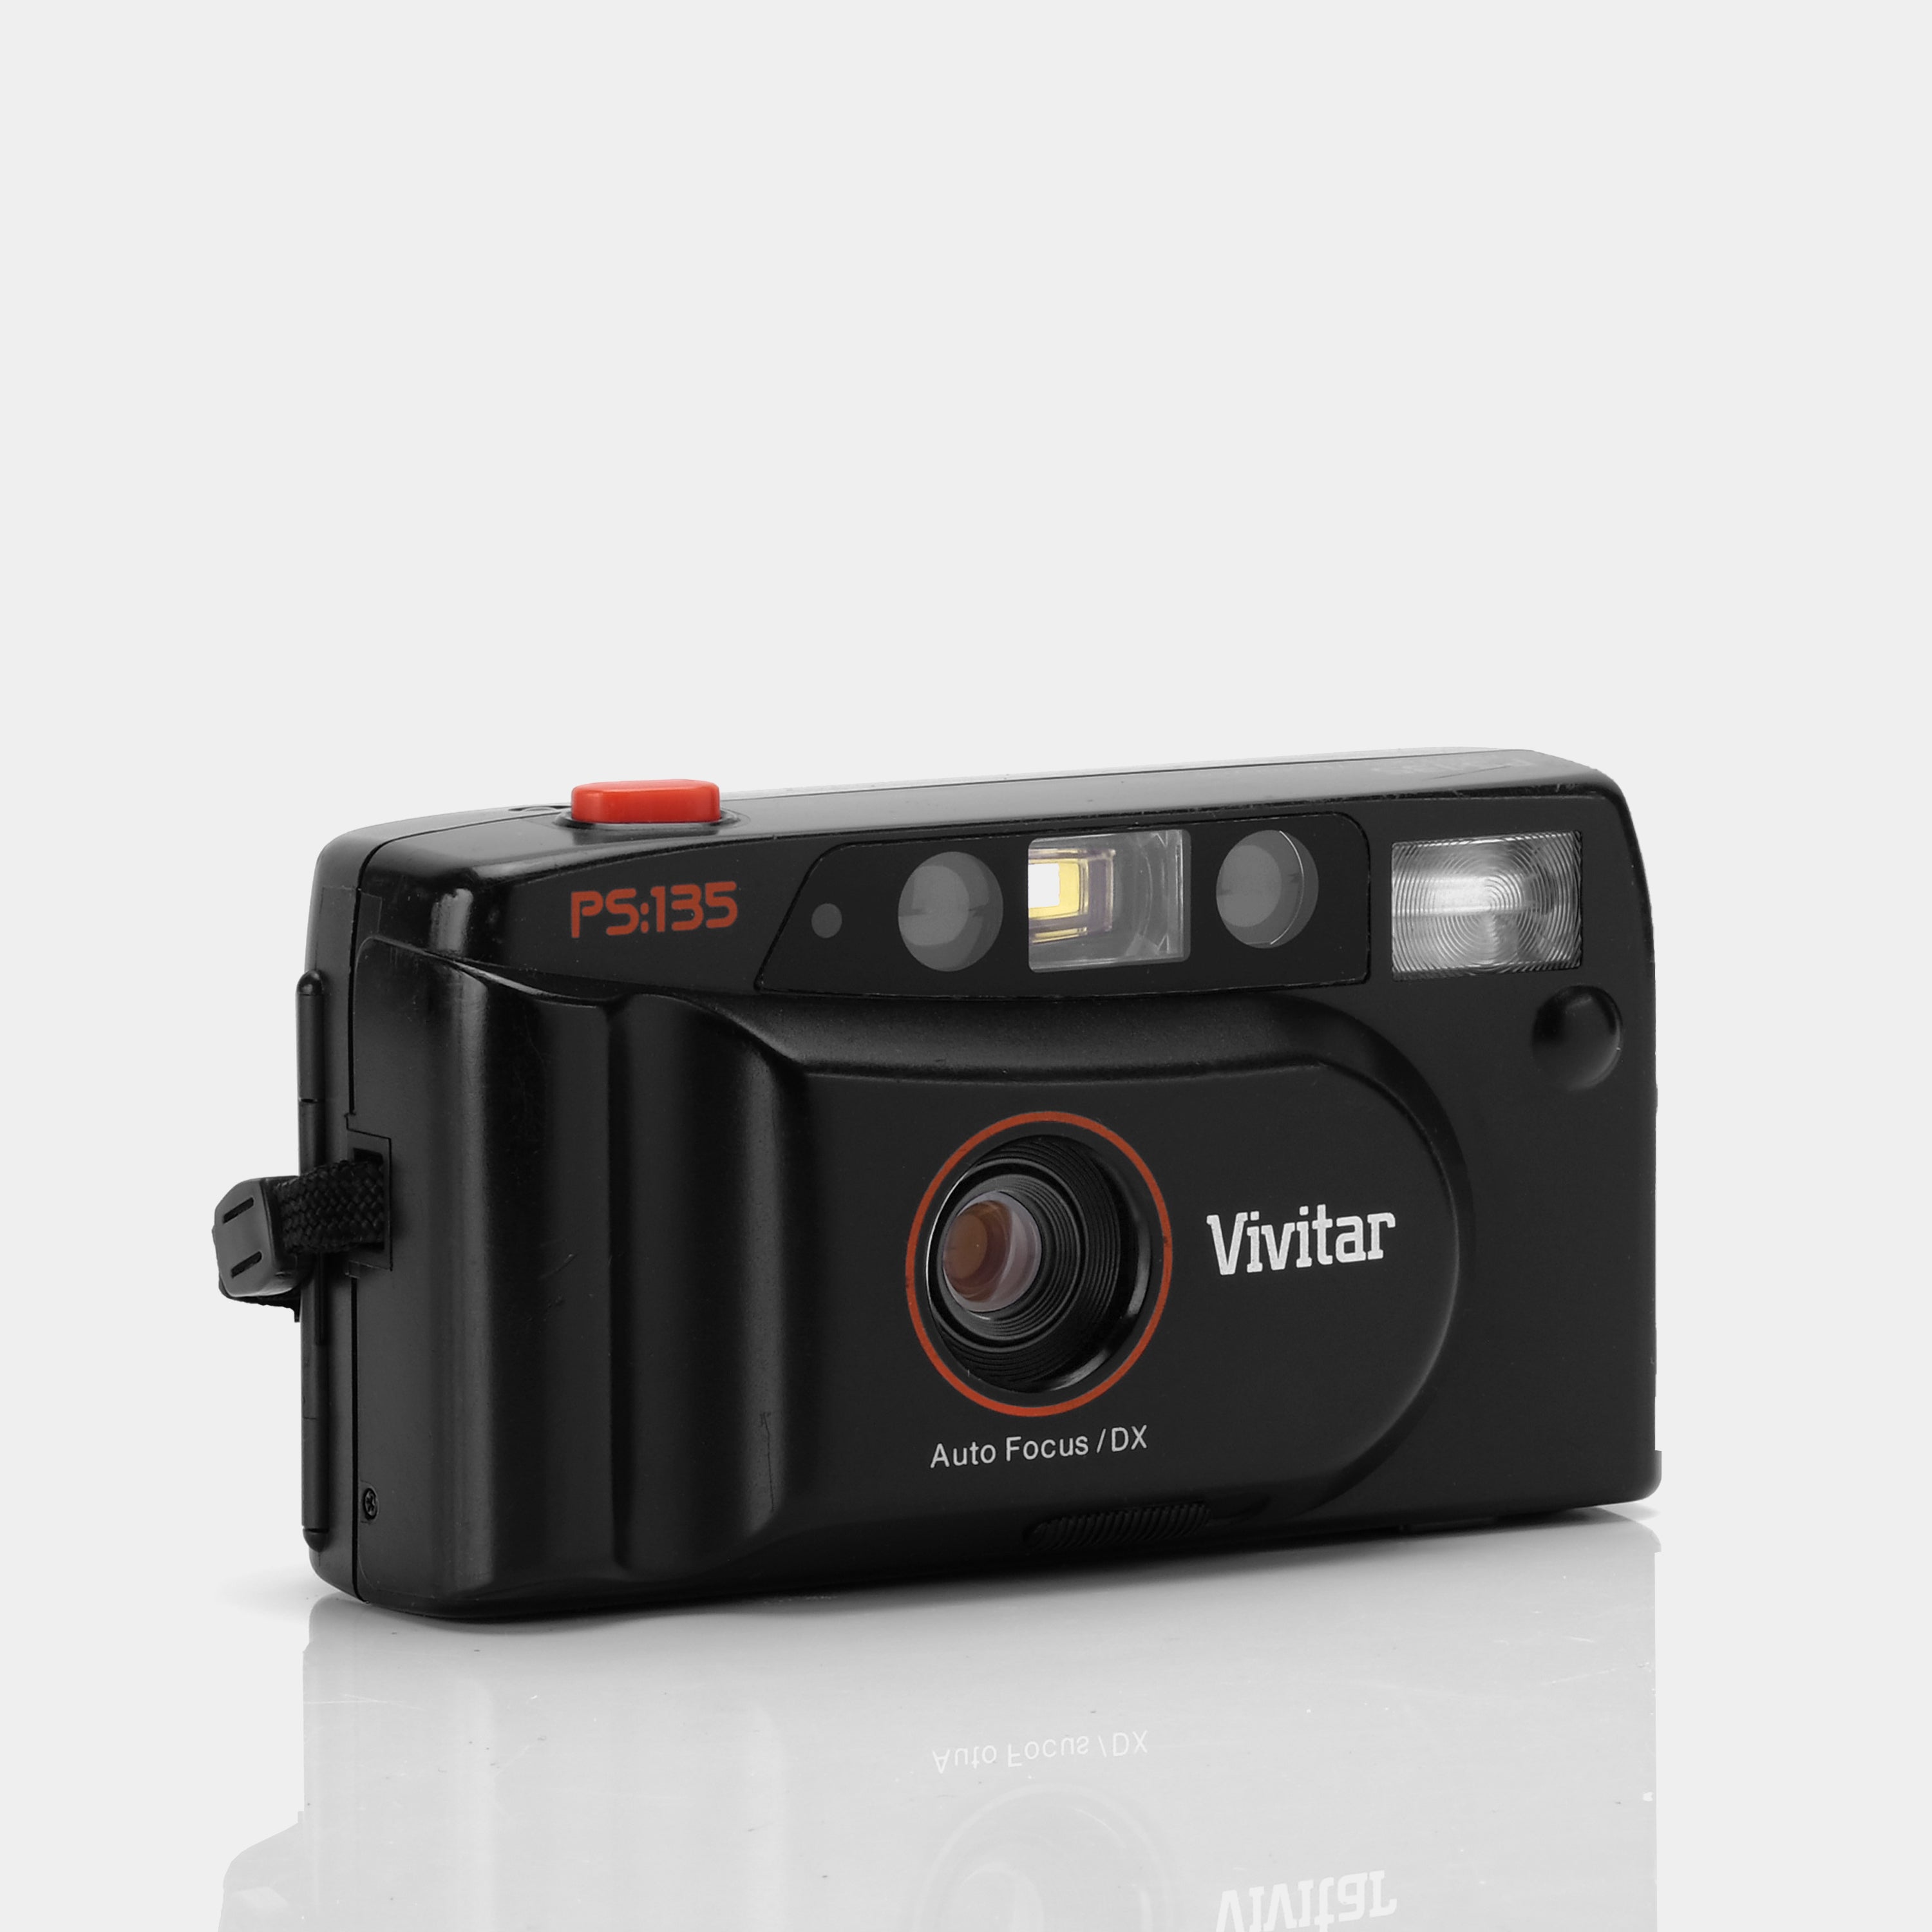 Vivitar PS:135 35mm Point and Shoot Film Camera